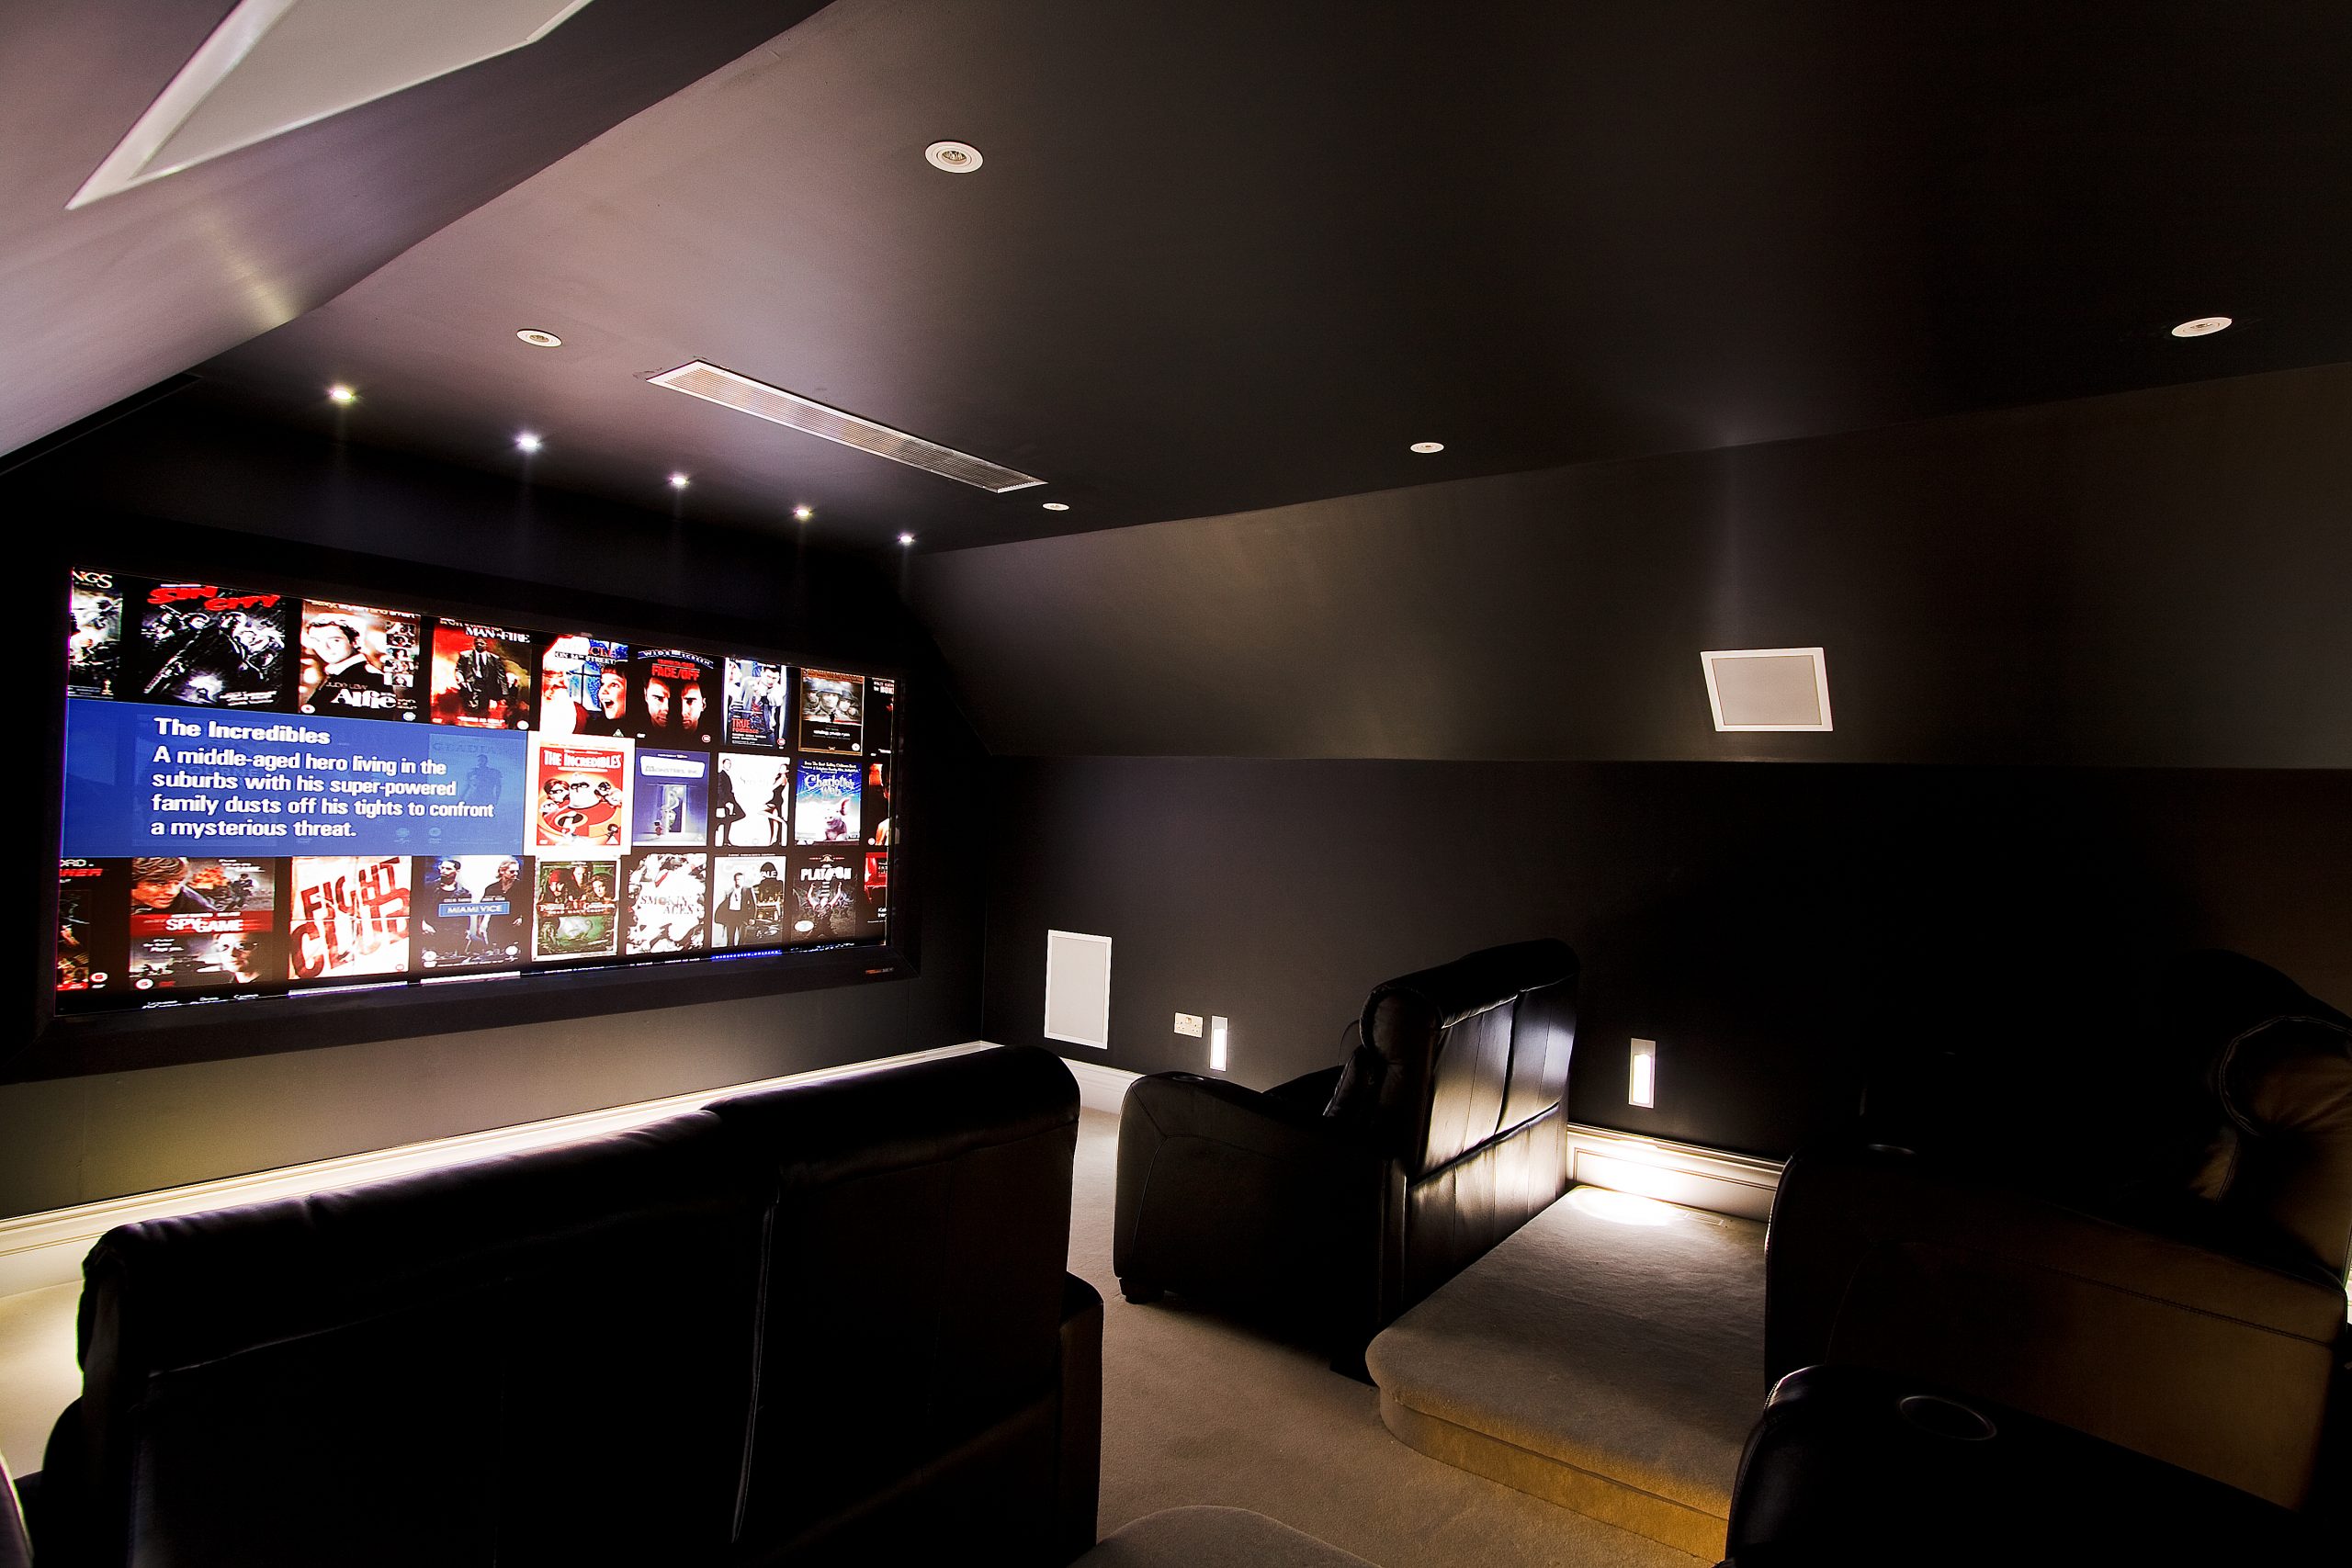 Home cinema with kaleidescape movie server, black leather home cinema seats and inwall speakers